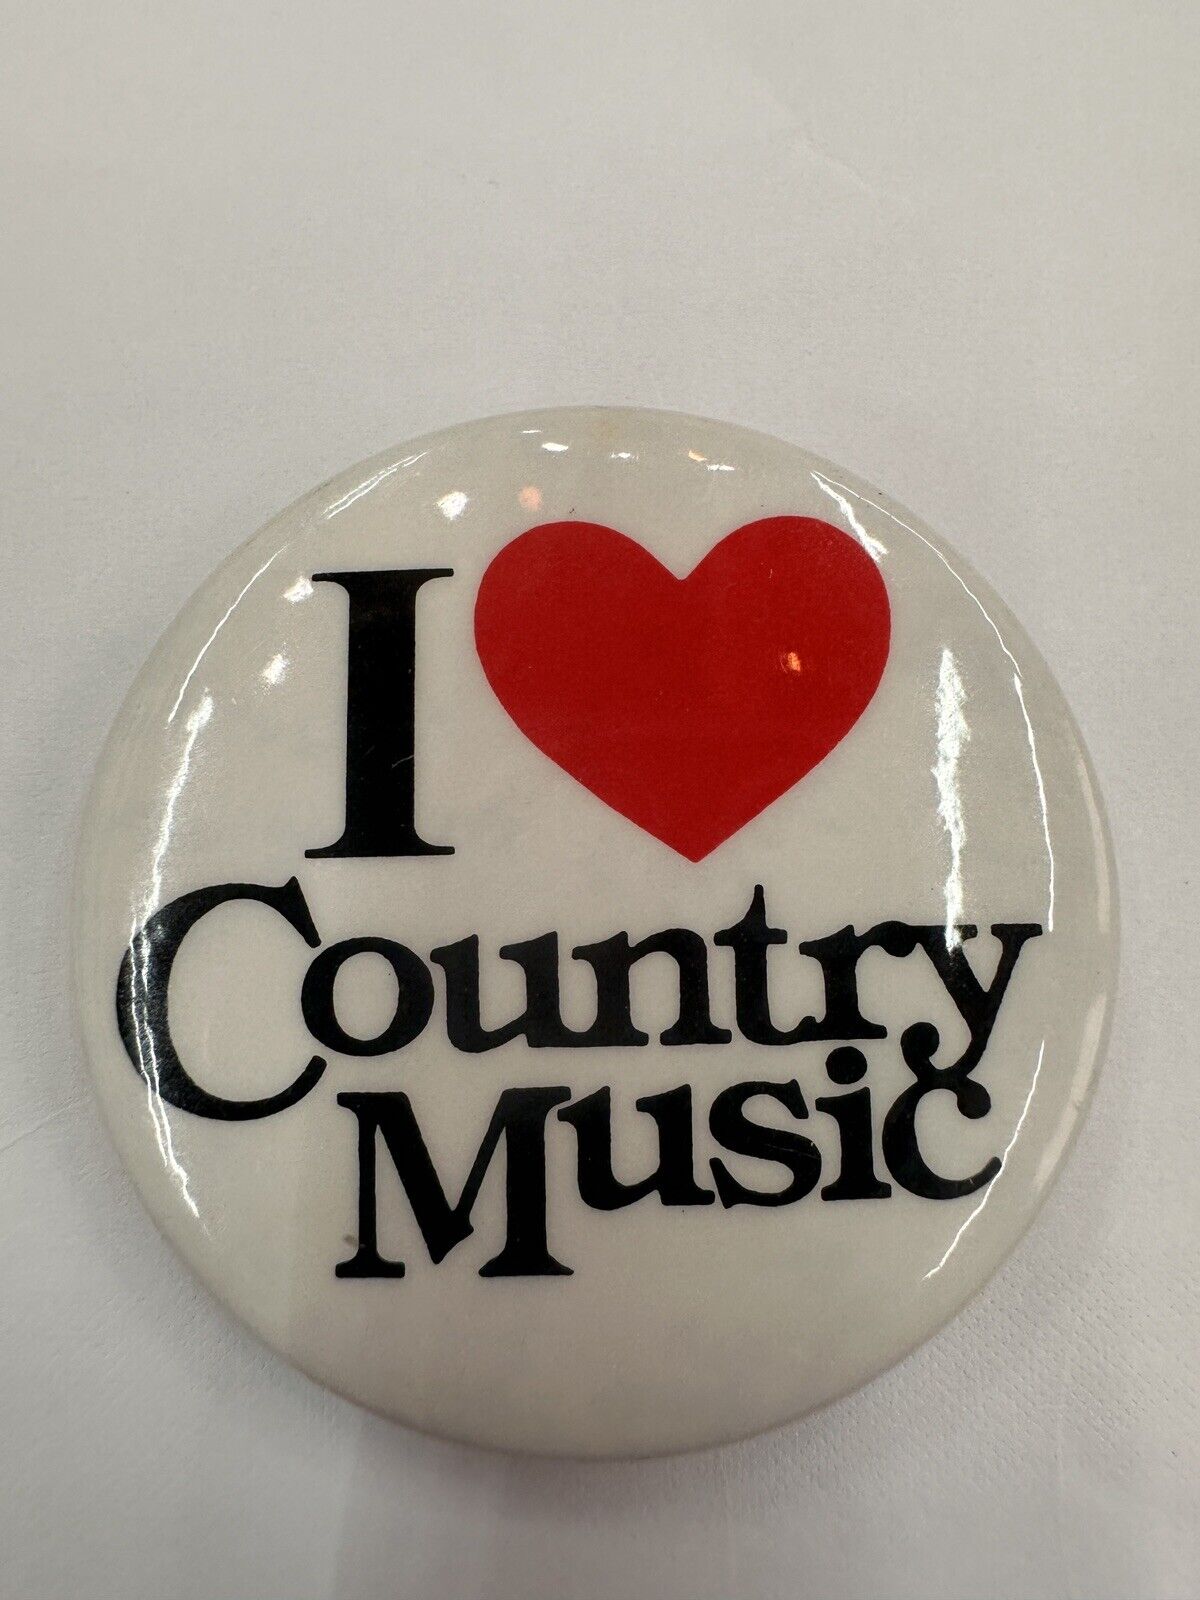 * Vintage 1970s I Love Country Music Pin Button